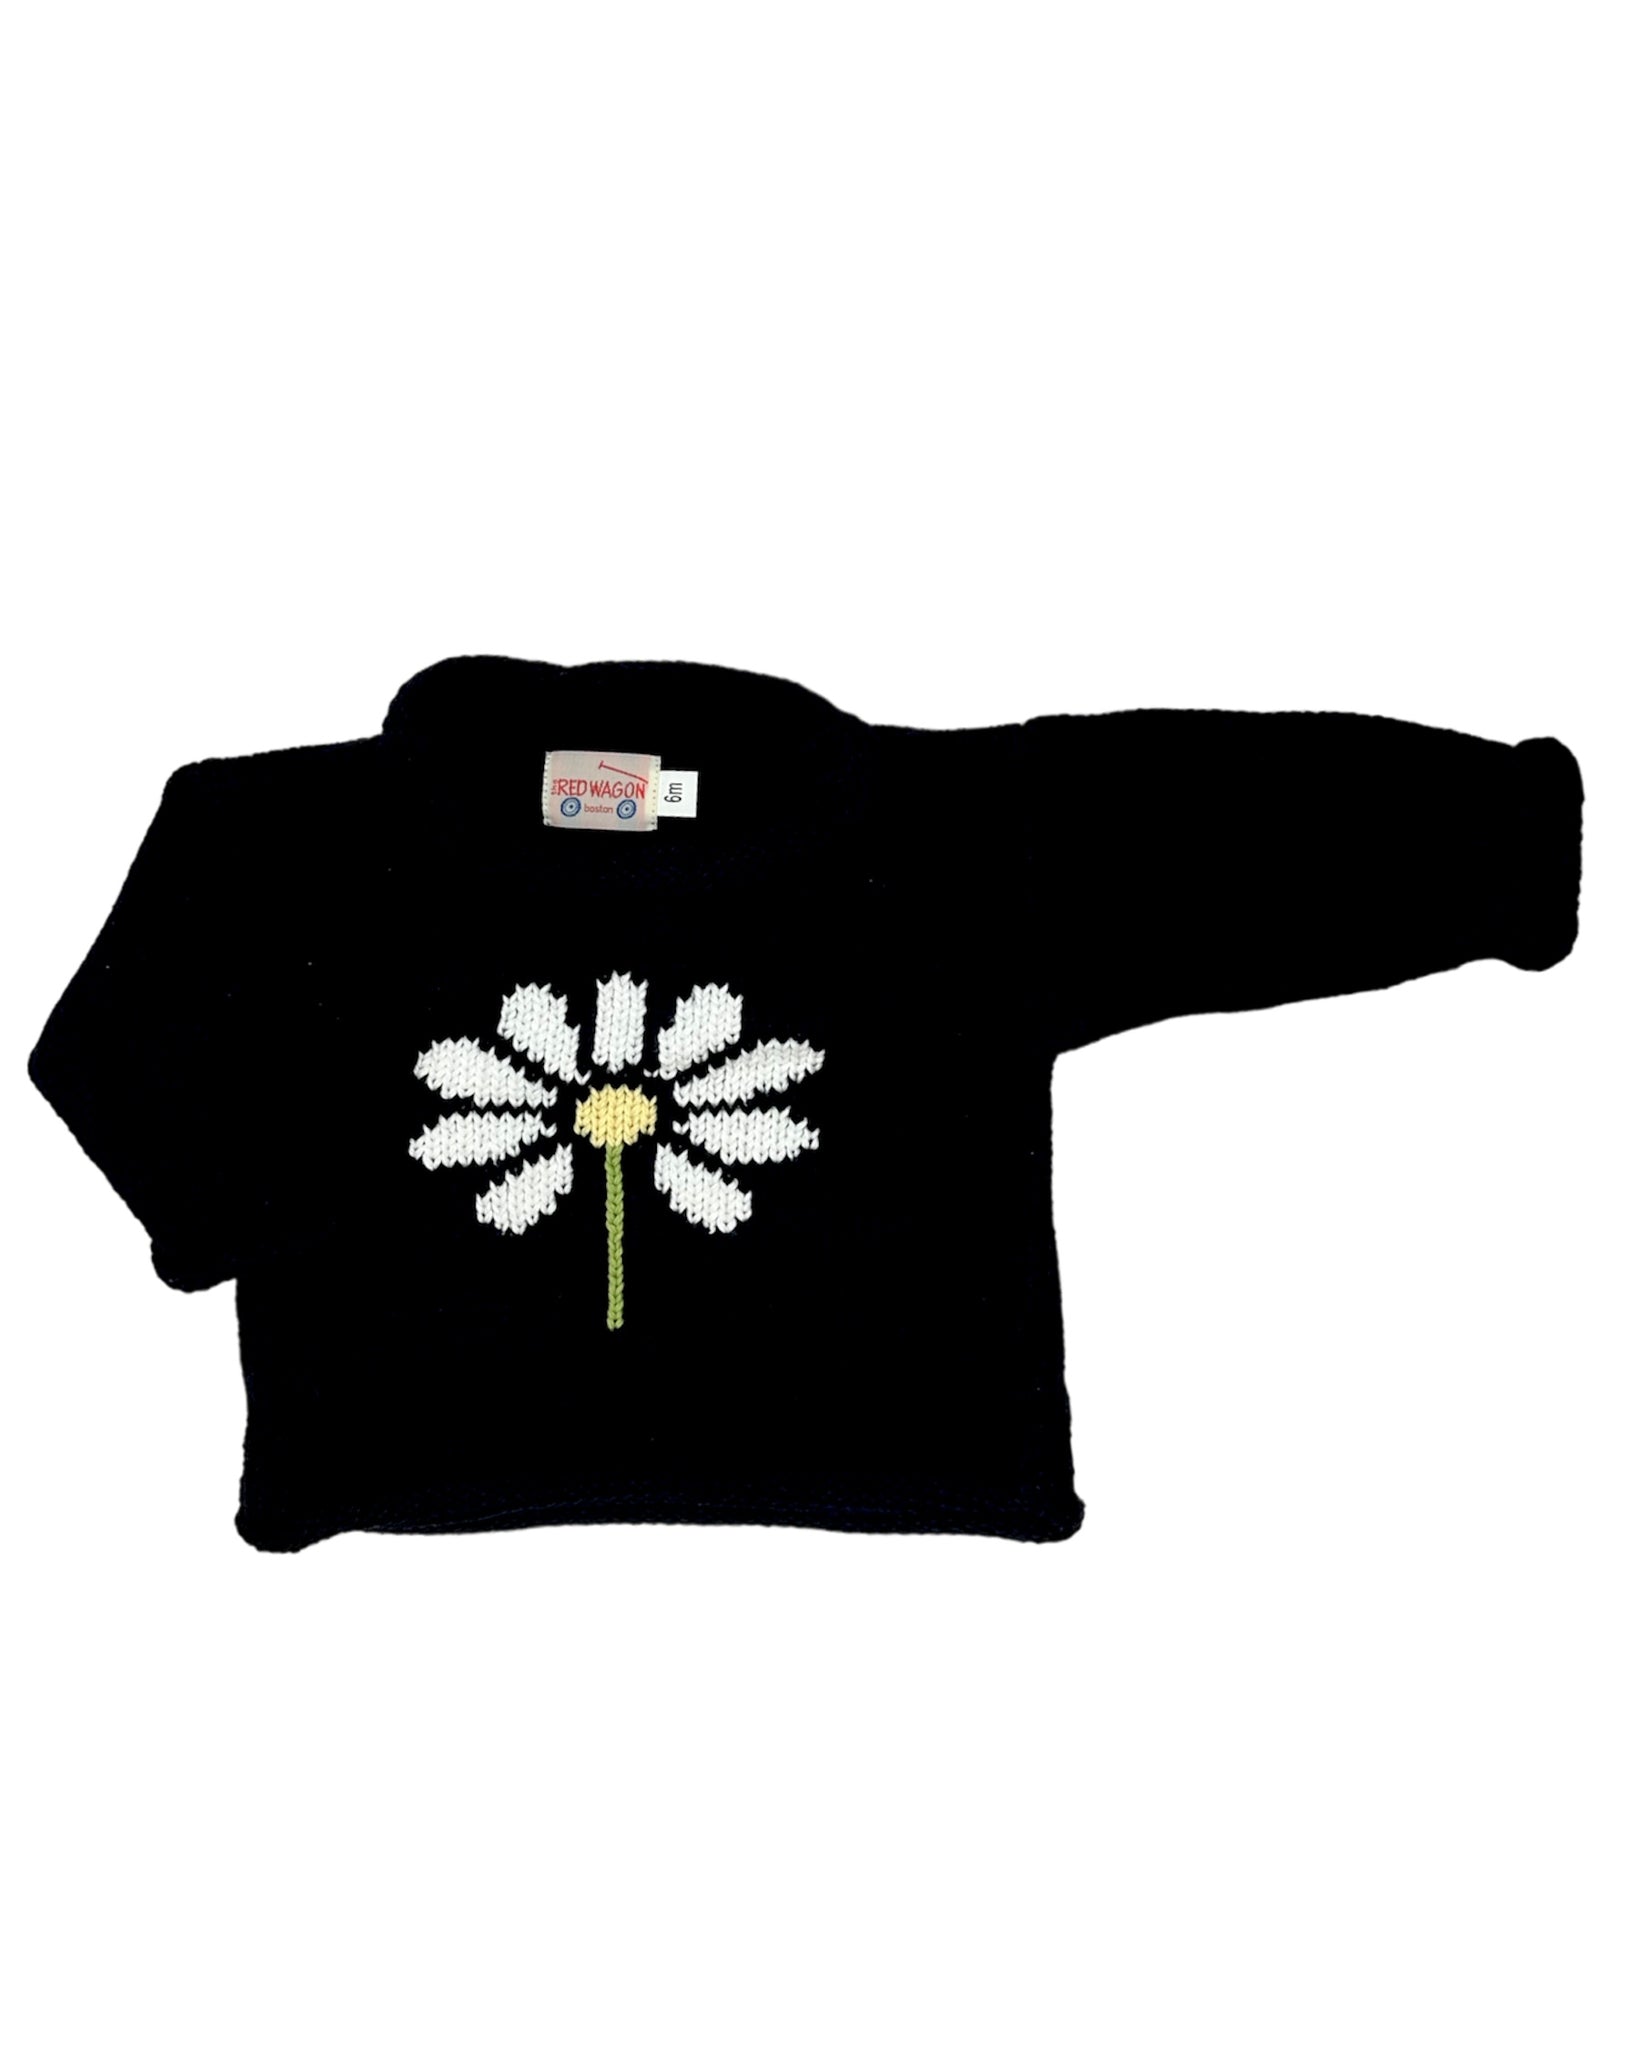 long sleeve navy blue sweater with white daisy flower in center